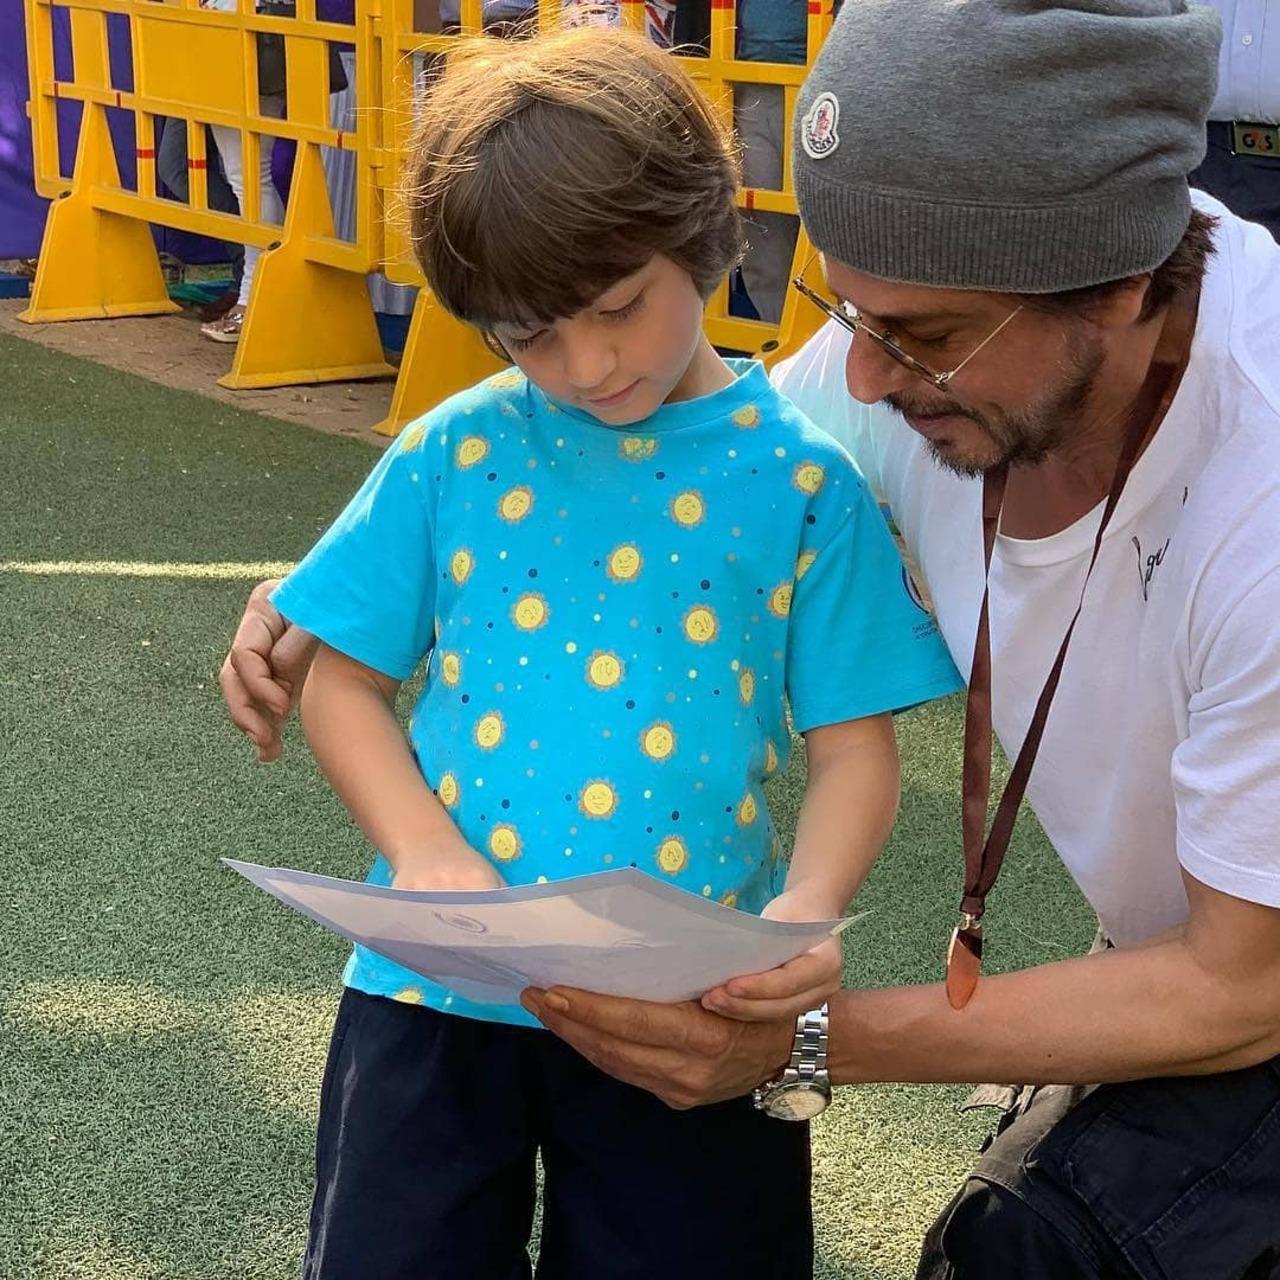 Shah Rukh Khan being the responsible father and guiding his little one